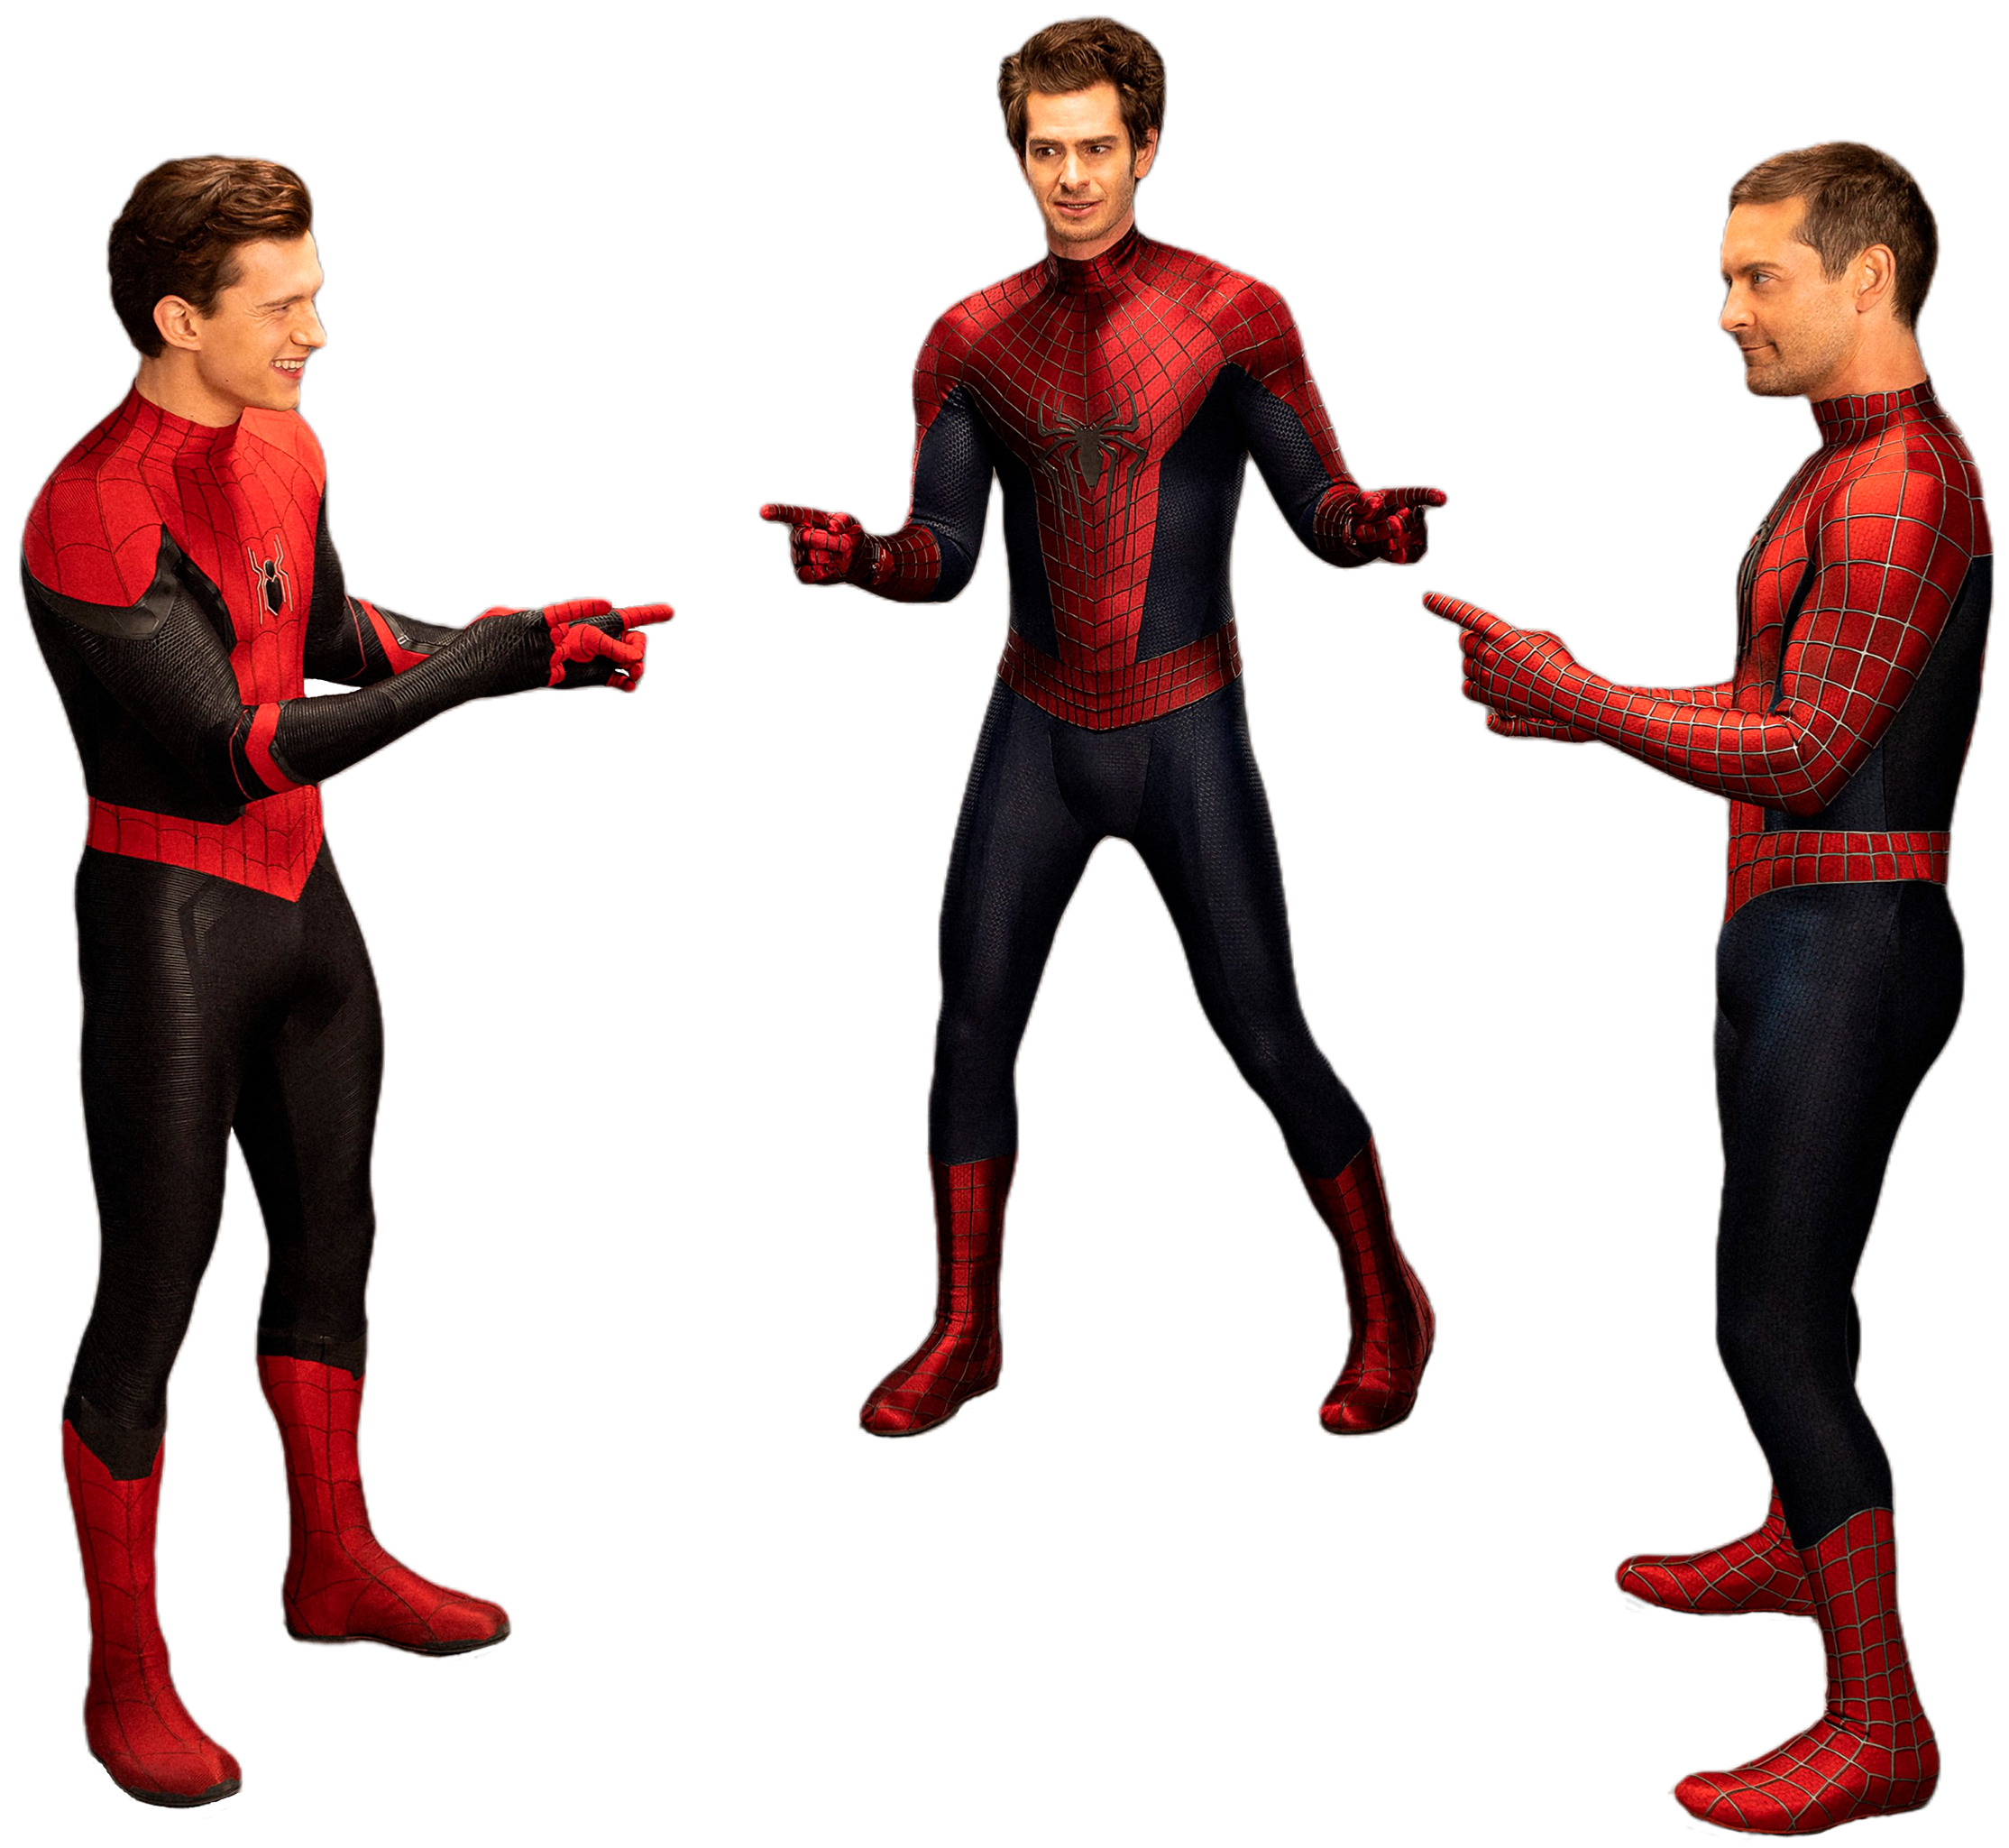 Spiderman Pointing Meme (No Way Home) by VegPNGs on DeviantArt